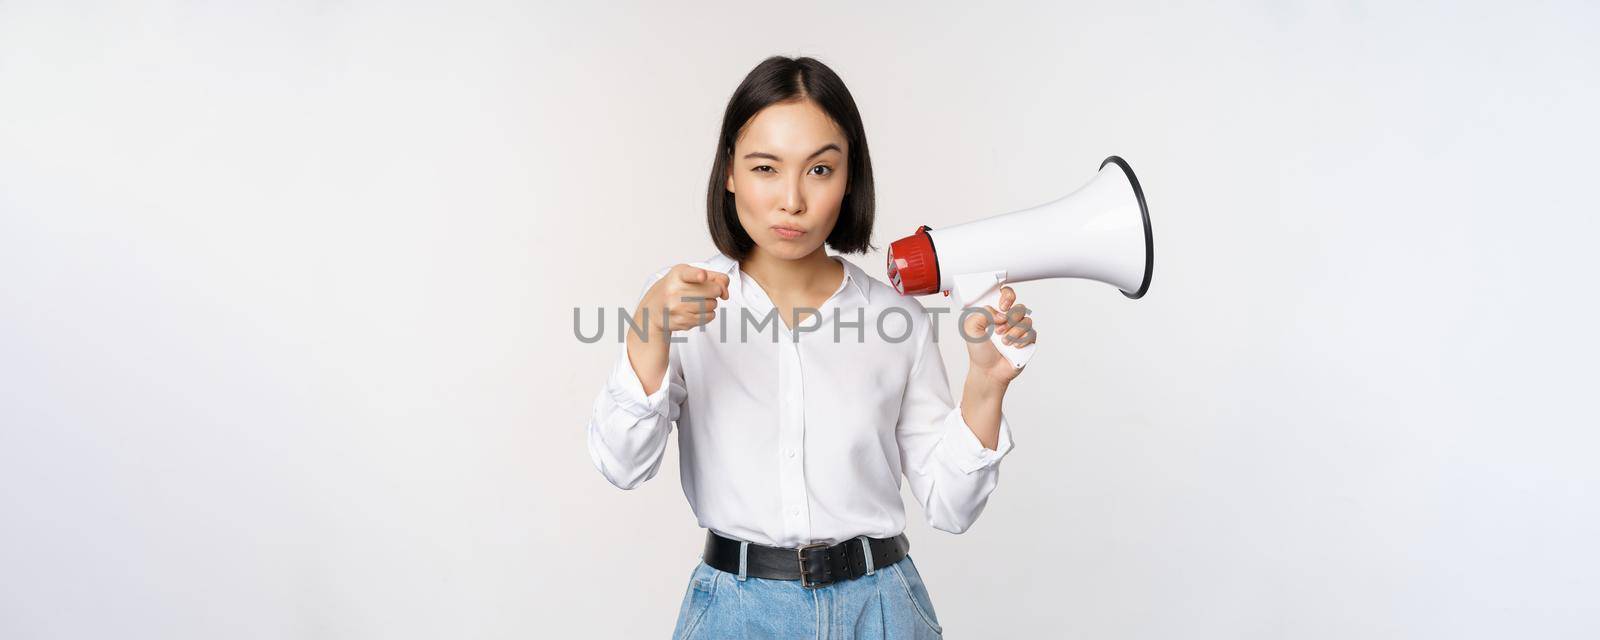 Image of modern asian woman with megaphone, pointing at you camera, making announcement, white background.